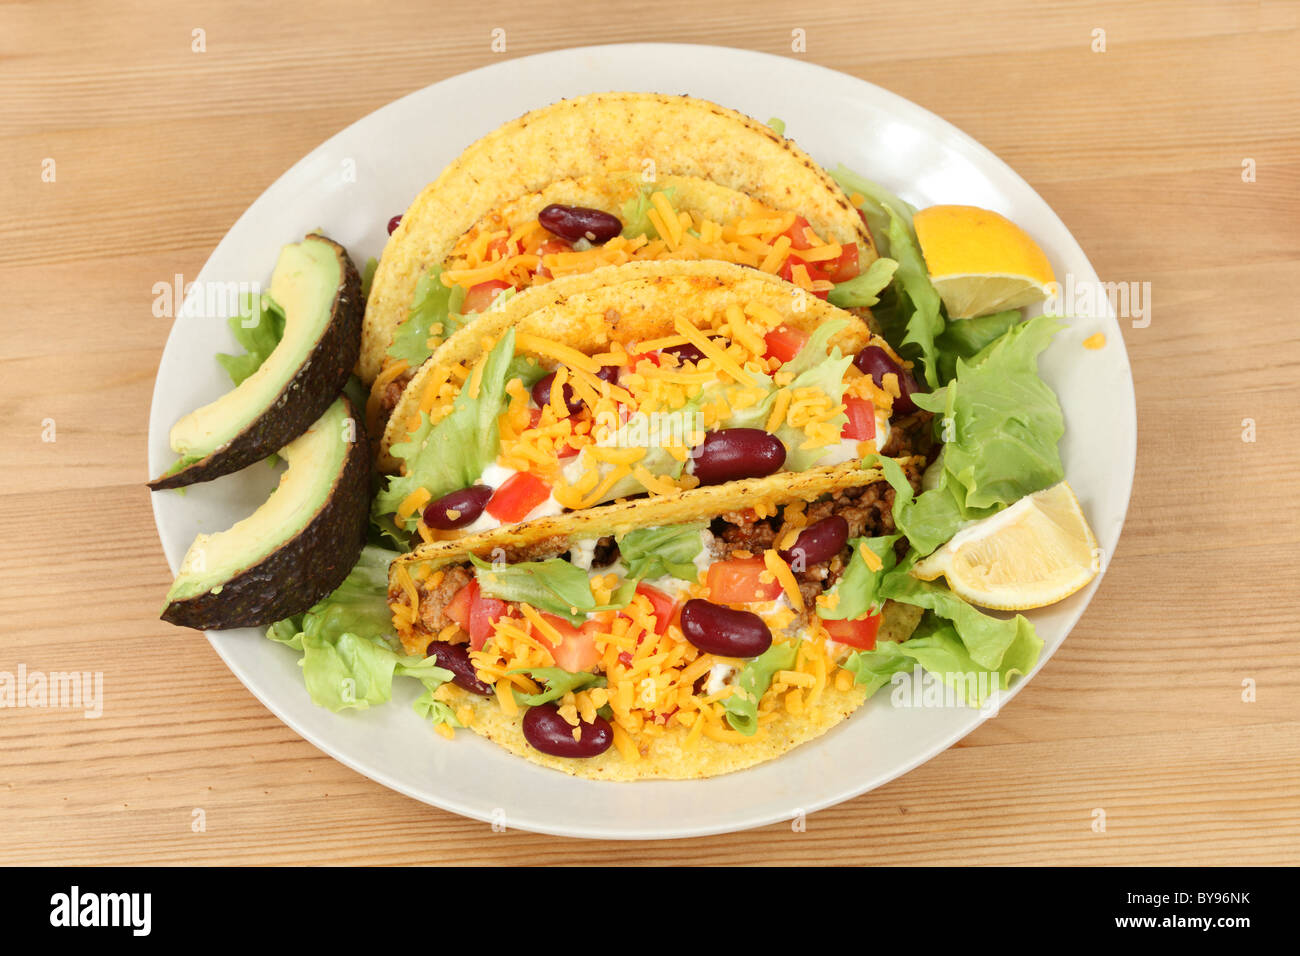 Mexcian food - plate with tacos, lettuce and avocado Stock Photo